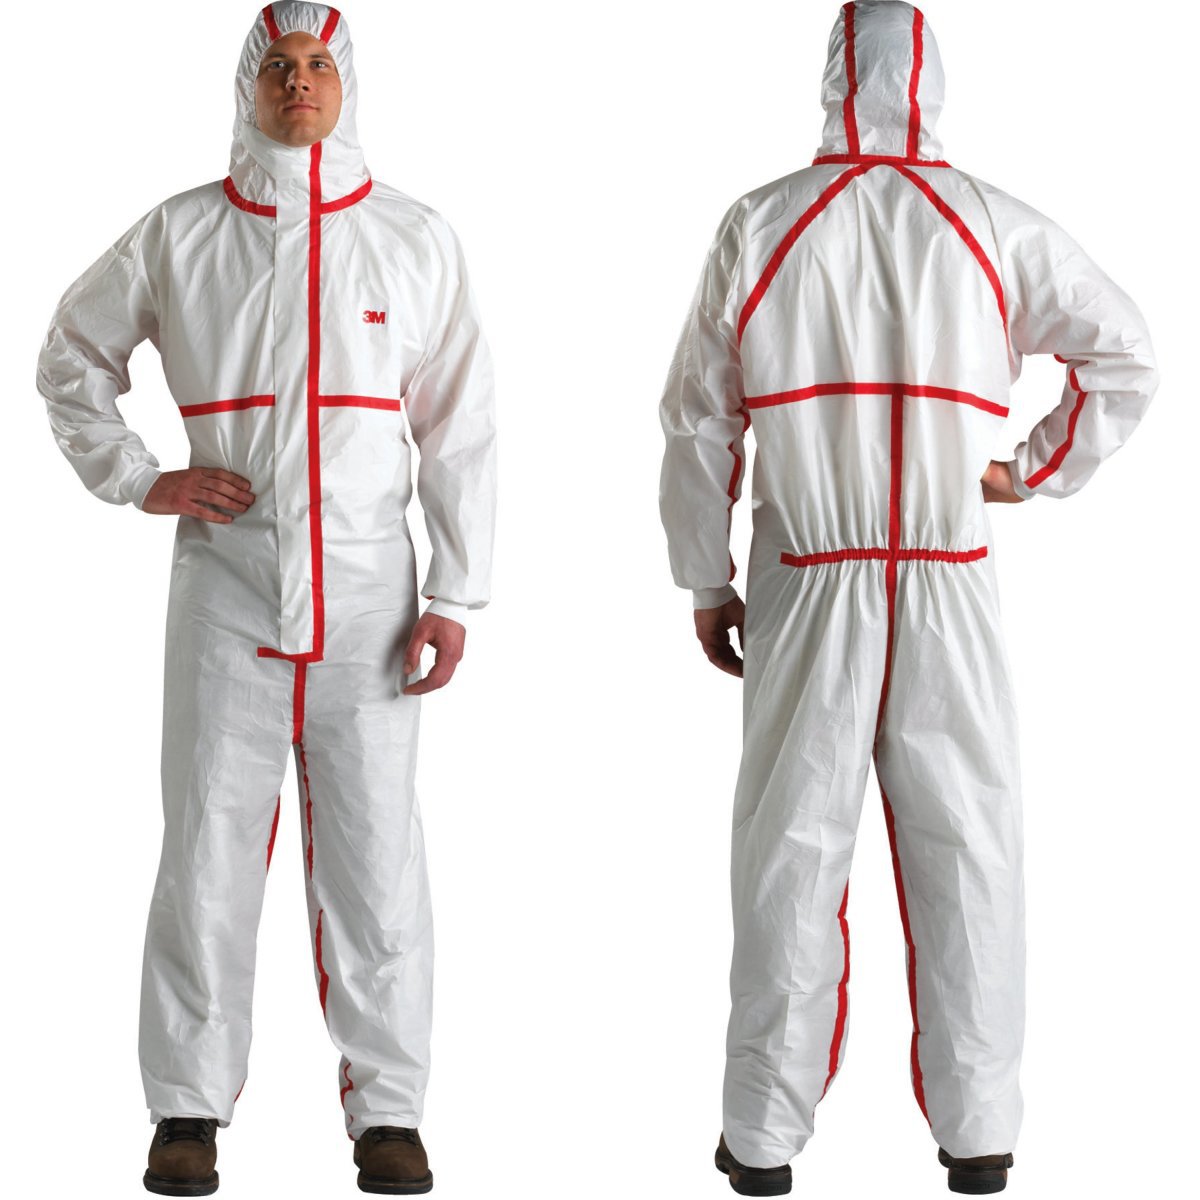 3M™ Disposable Chemical Protective Coverall 4565 Bulk XXL White (Availability restrictions apply.)